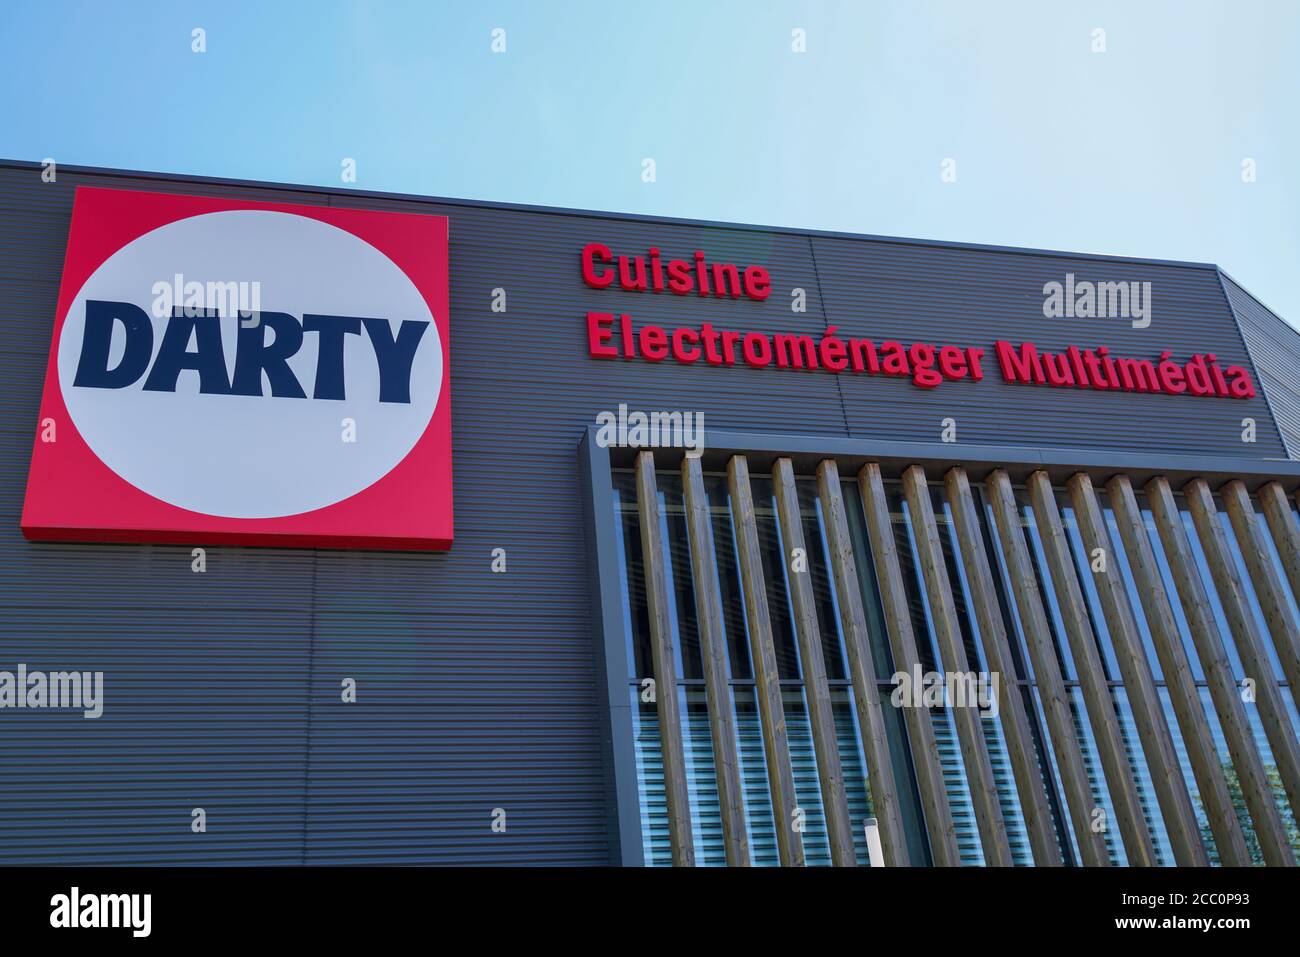 Bordeaux Aquitaine France 08 10 Darty Logo And Text Sign In Building Facade Entrance Of Shop High Tech French Store Stock Photo Alamy